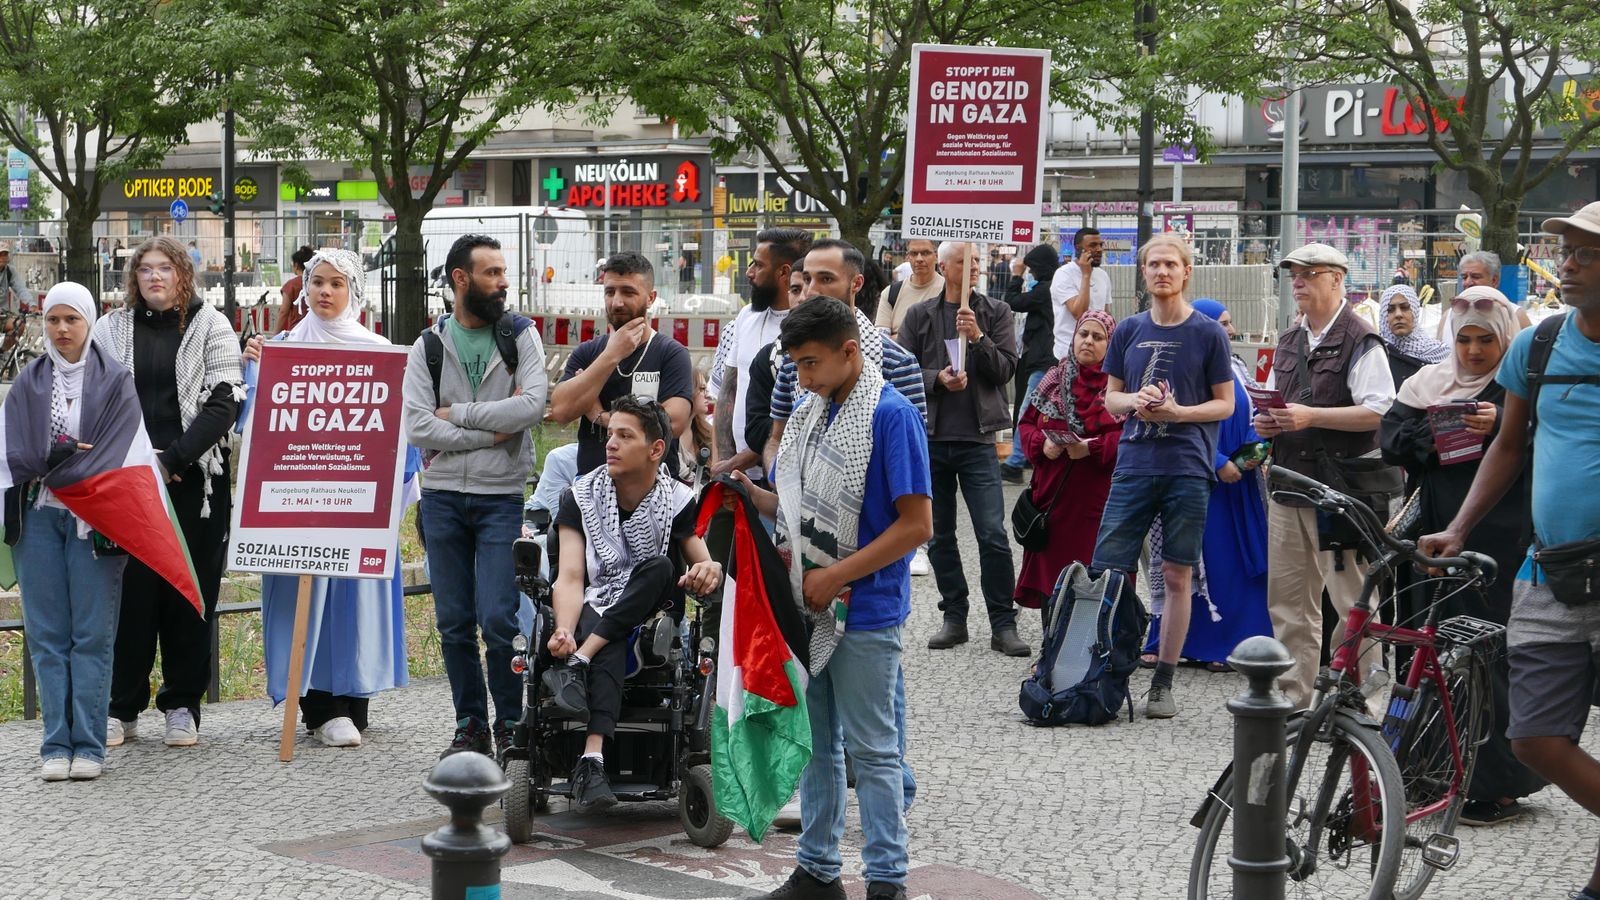 Stop the genocide in Gaza! Sozialistische Gleichheitspartei holds Berlin rally for the European elections